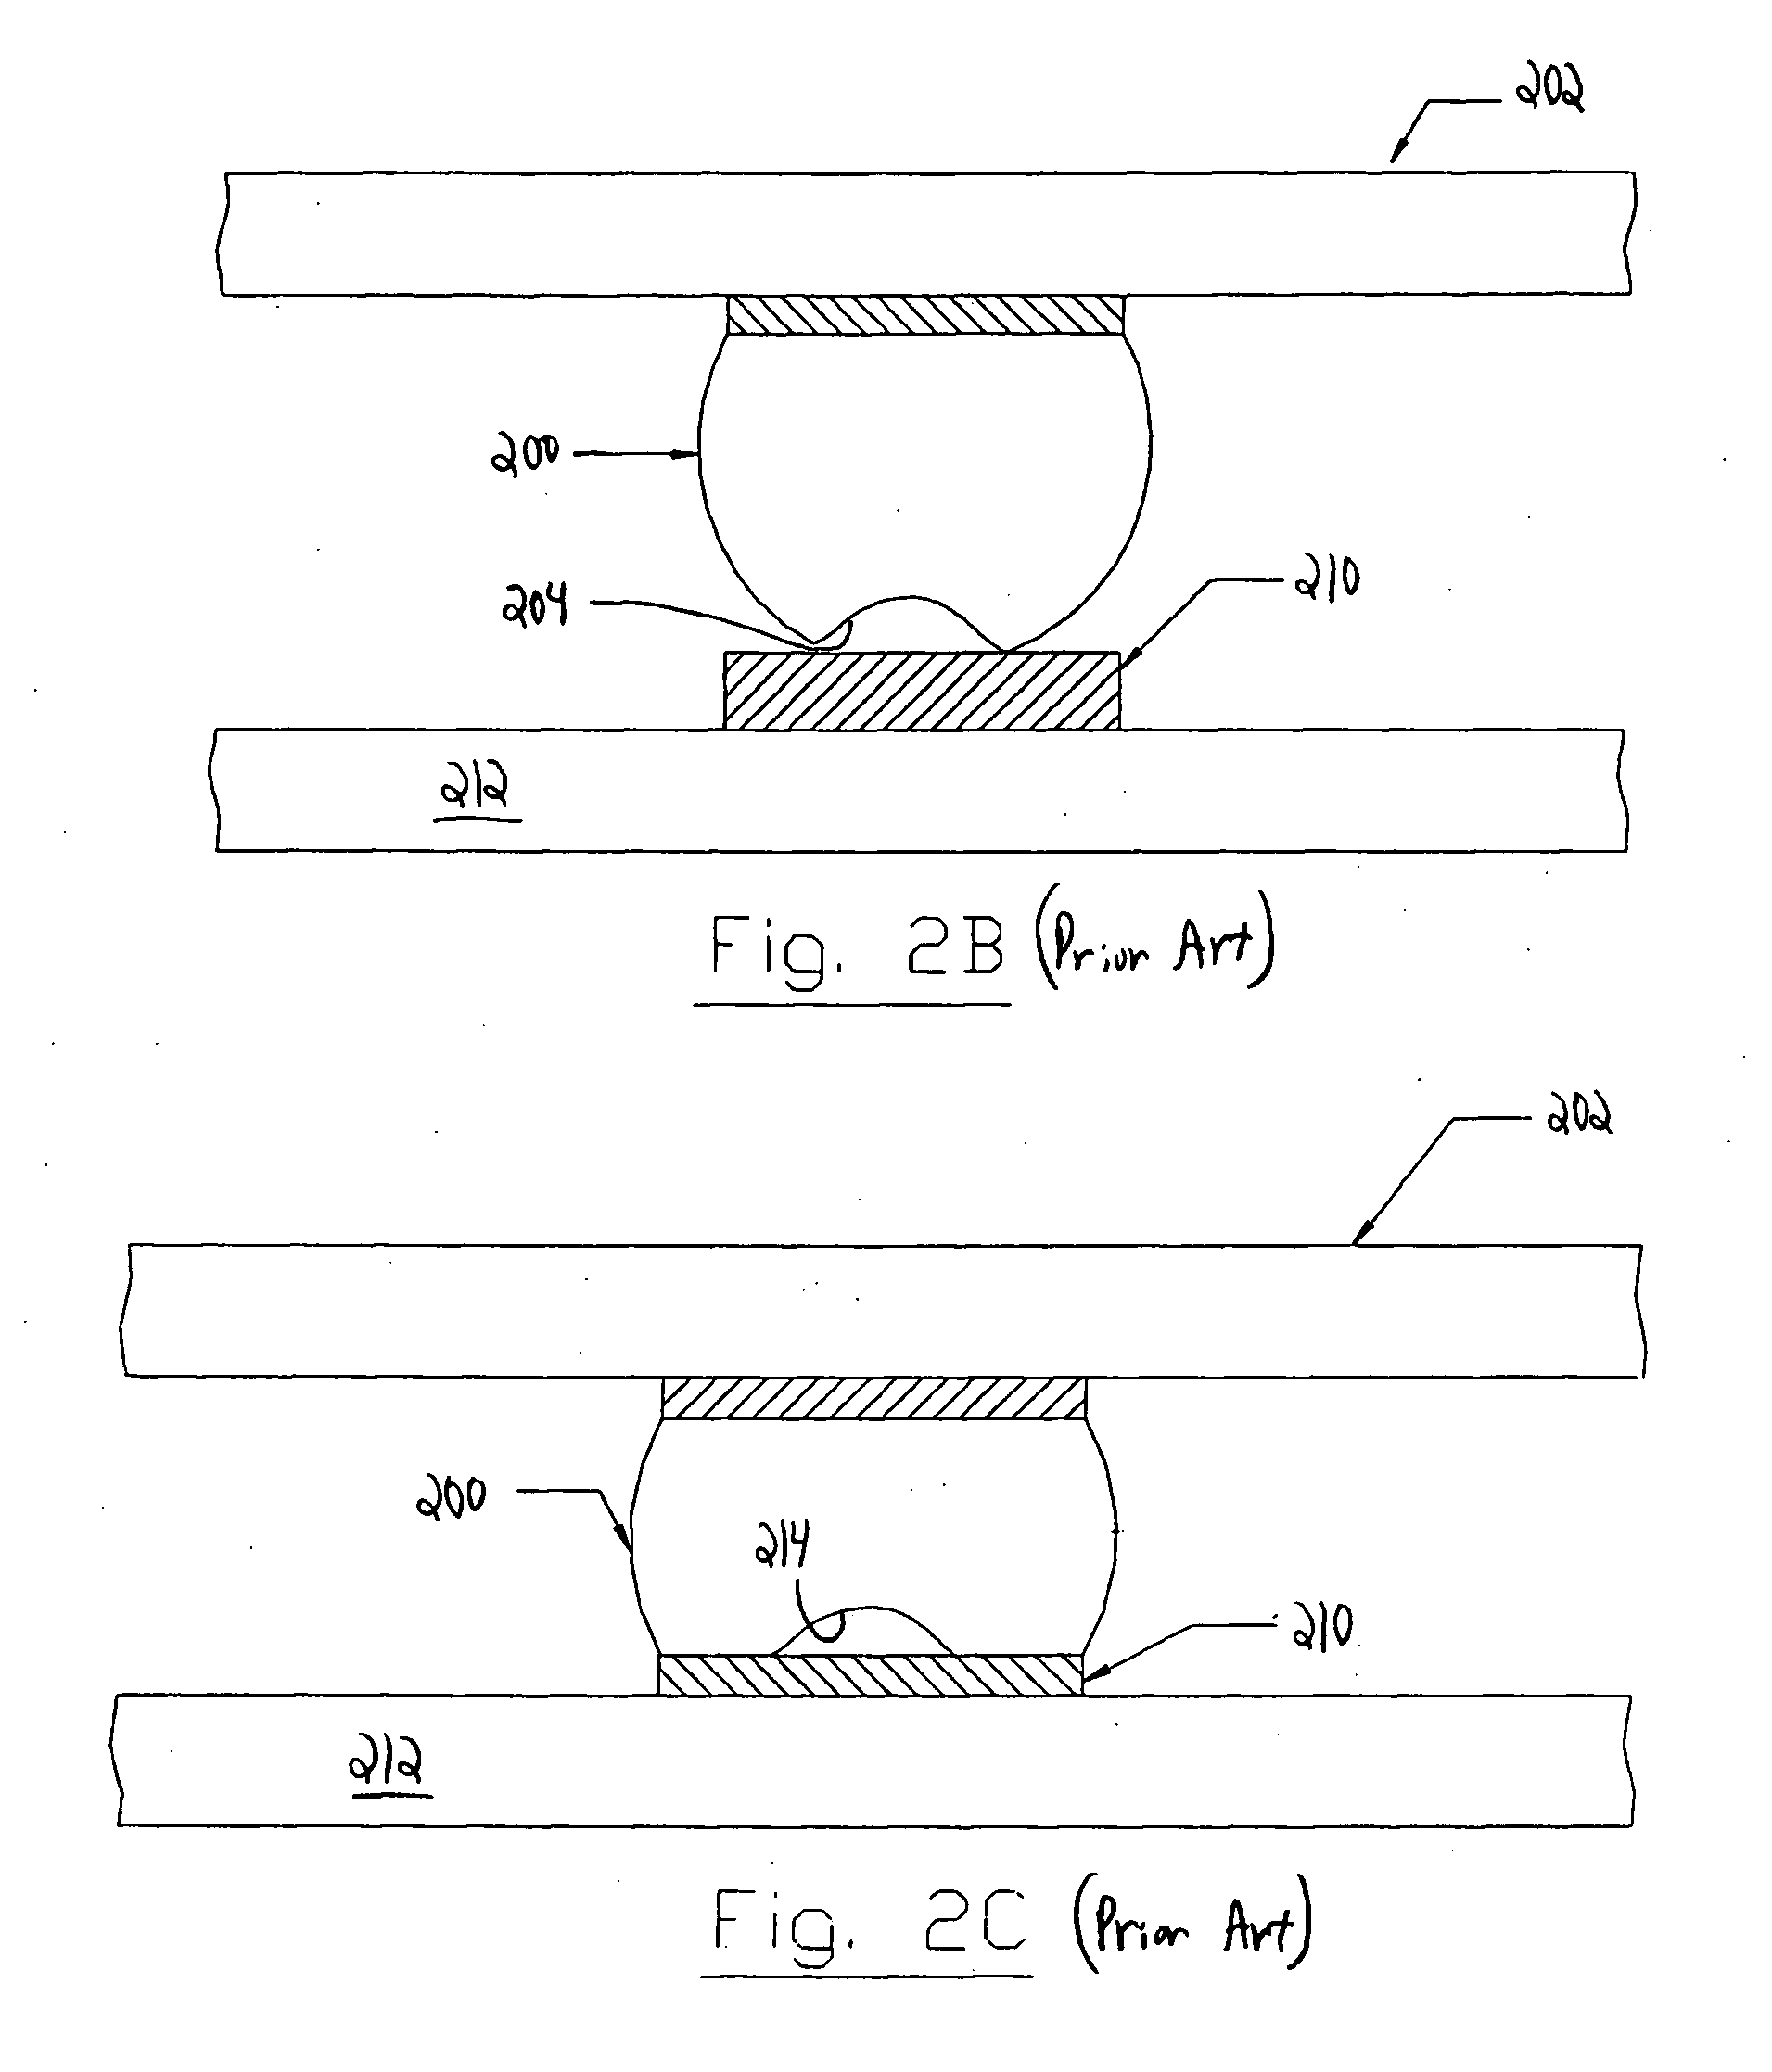 Method and system for batch forming spring elements in three dimensions